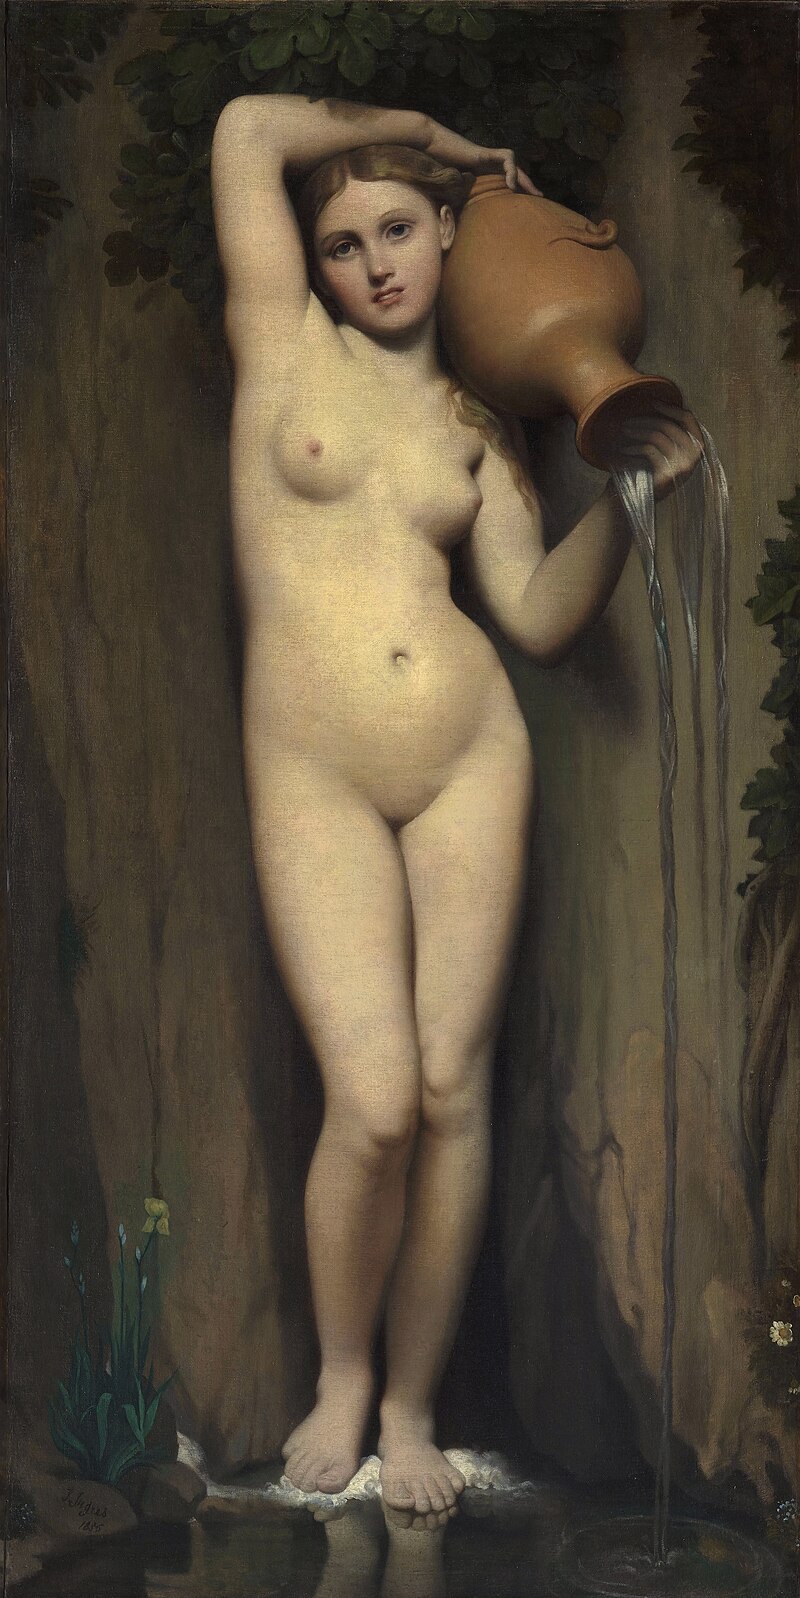 Jean_Auguste_Dominique_Ingres_-_The_Spring_-_Google_Art_Project_2.jpg